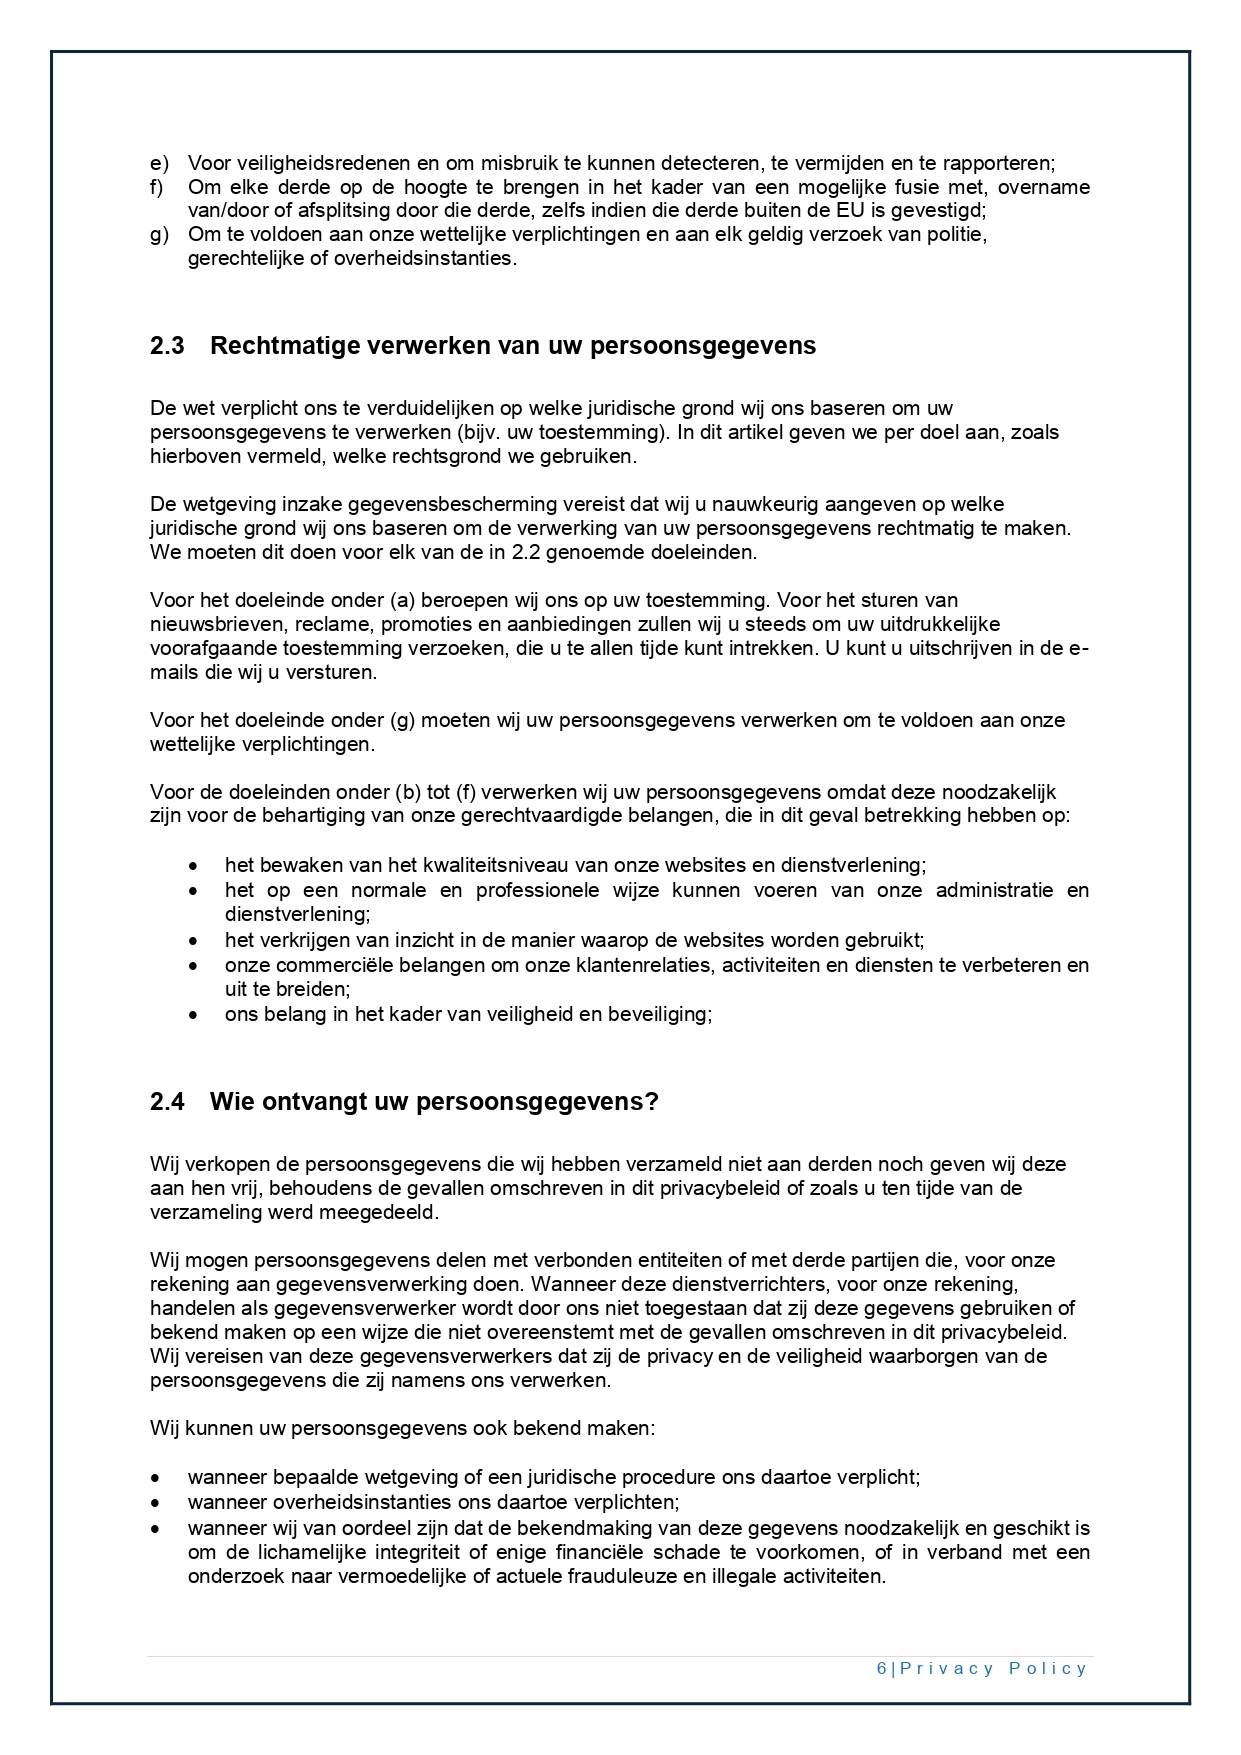 02 Privacy Policy textup.be NL V1.0 page 0006